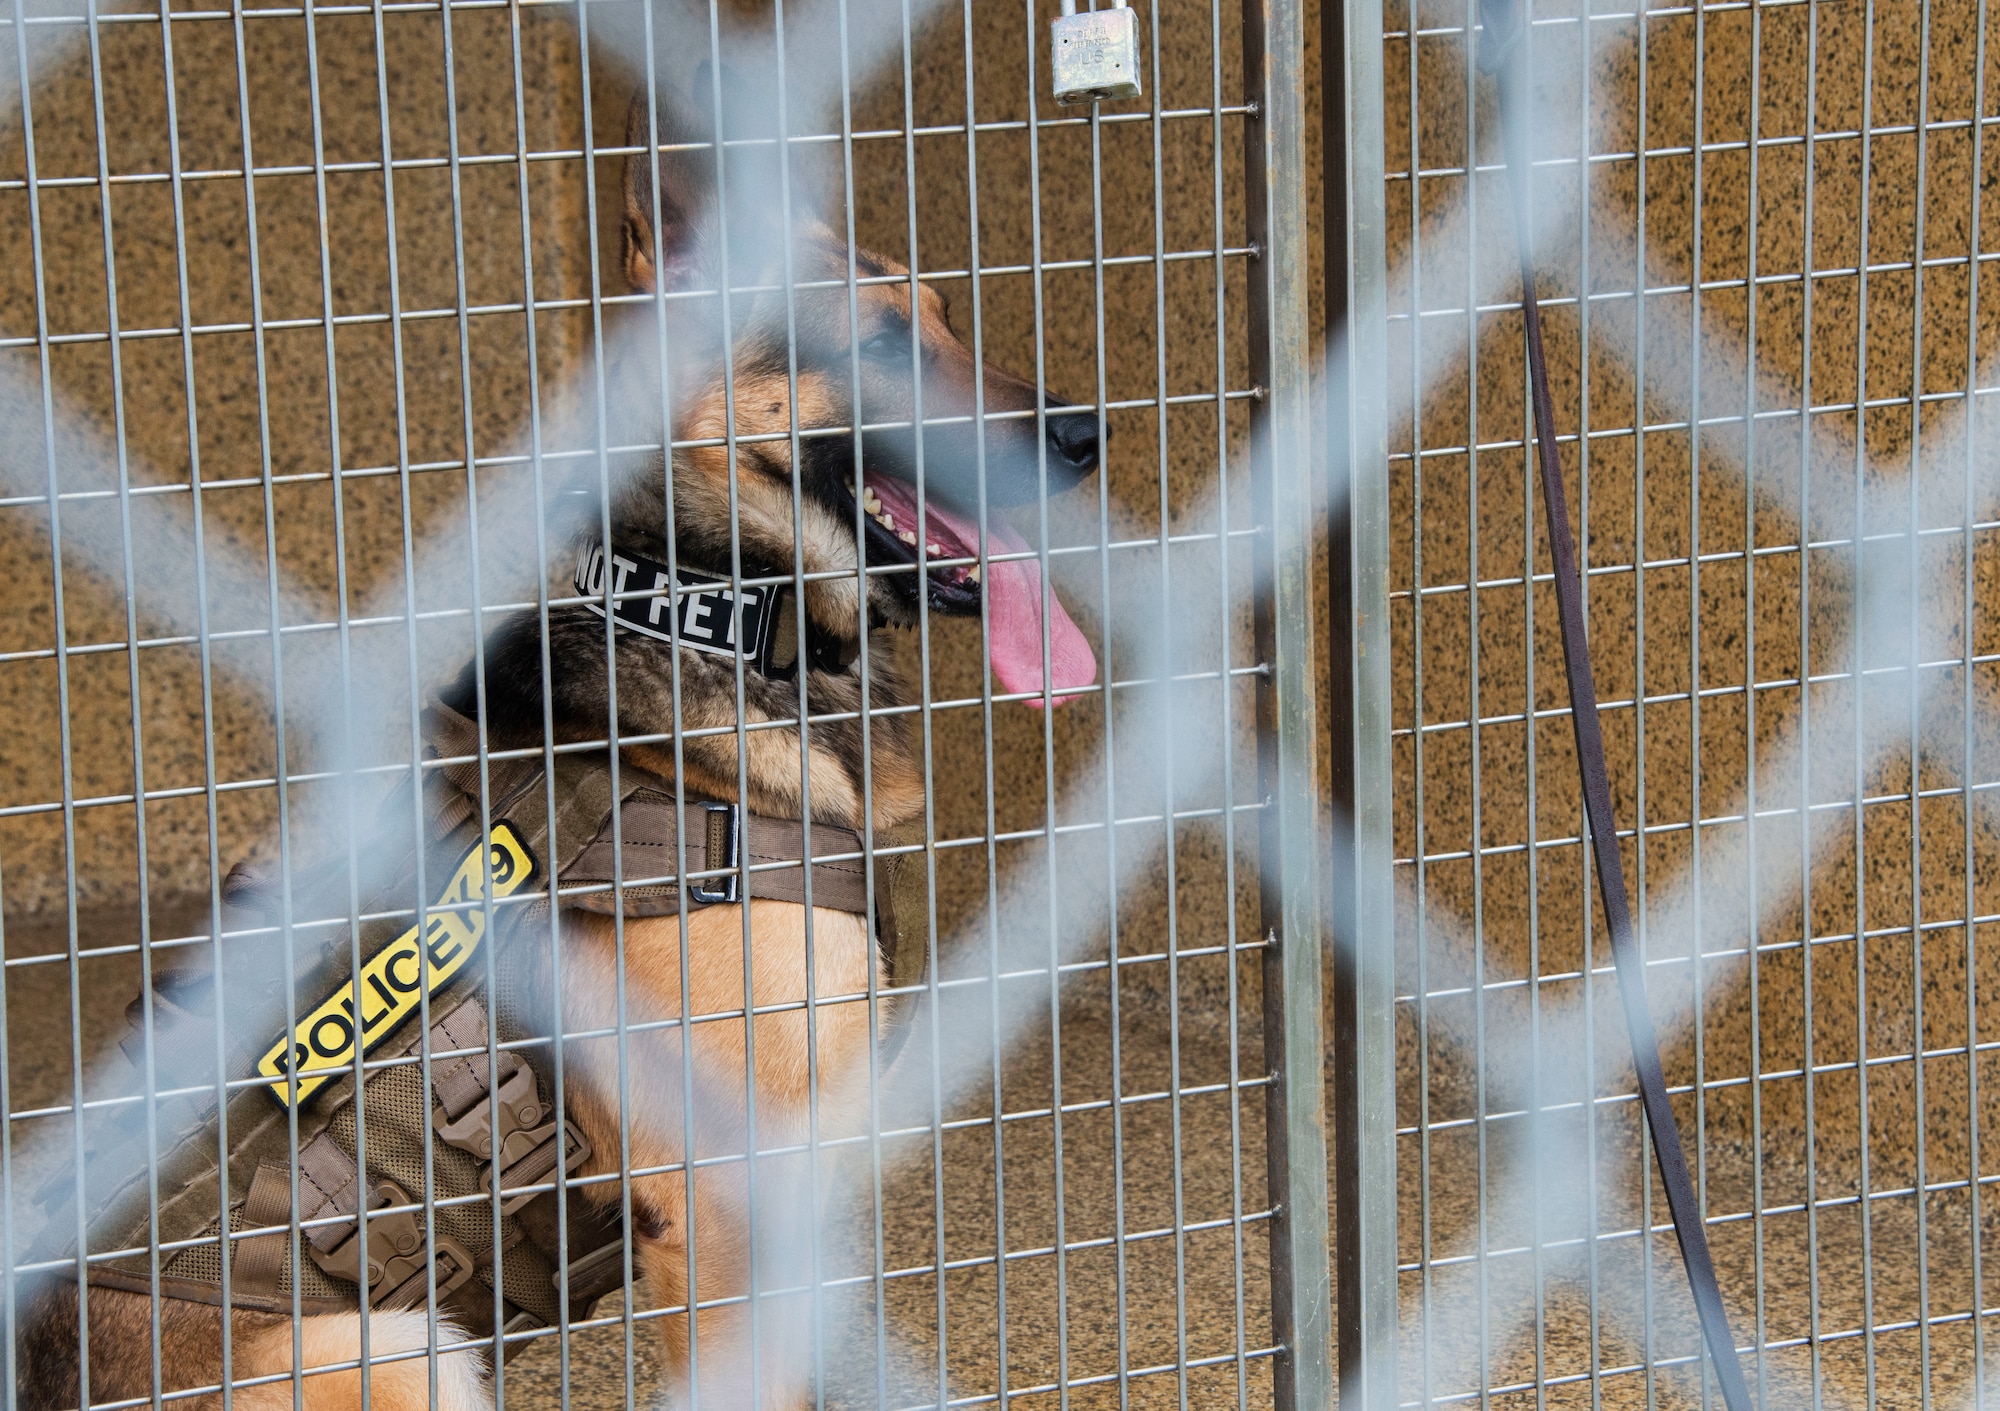 Sunny, a 325th Security Forces Squadron military working dog, relaxes in his kennel at Tyndall Air Force Base, Florida, March 3, 2020. Military working dog handlers spend their duty hours training their dogs, cleaning kennels, or going to medical appointments for the animal. This photo was taken while doing a demonstration for K-9 Veterans Day. (U.S. Air Force photo by 2nd Lt. Kayla Fitzgerald)